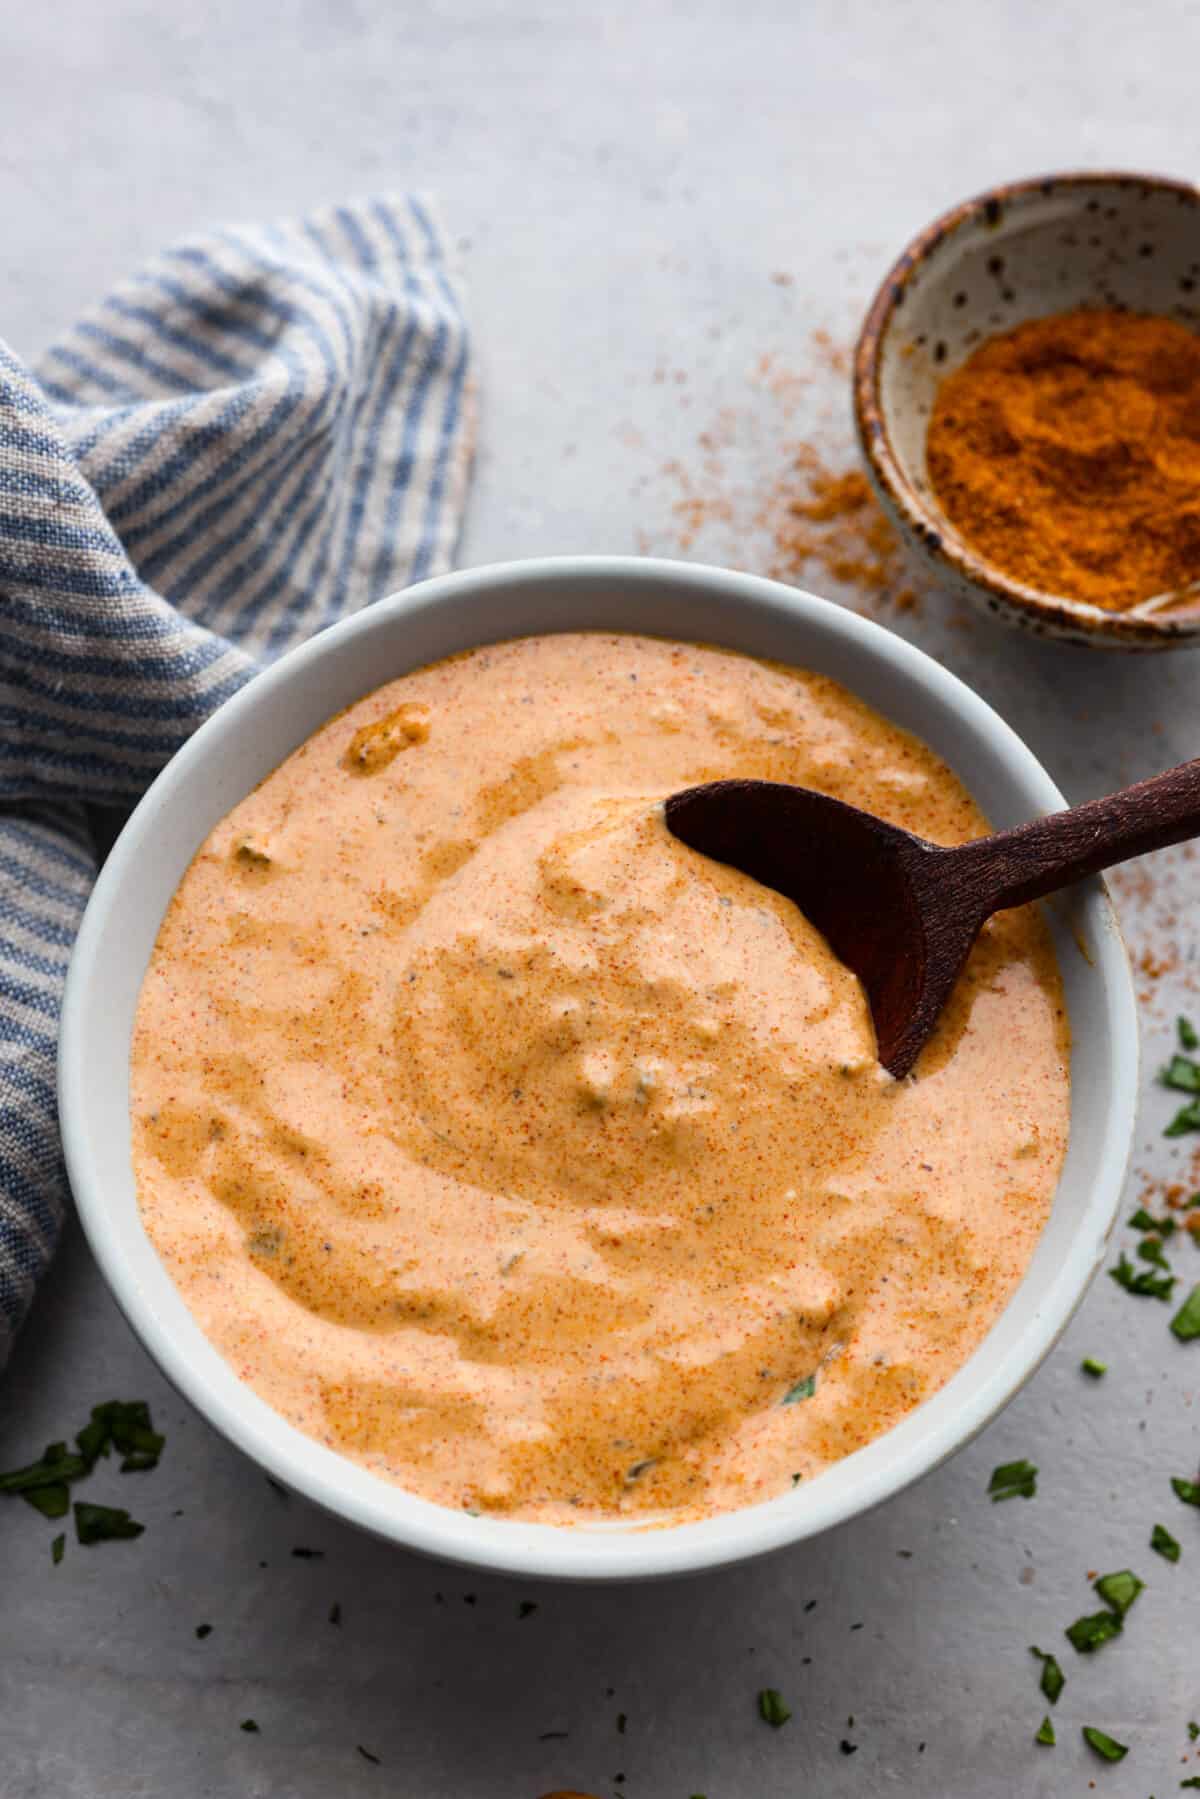 Top-down view of remoulade sauce in a white bowl.